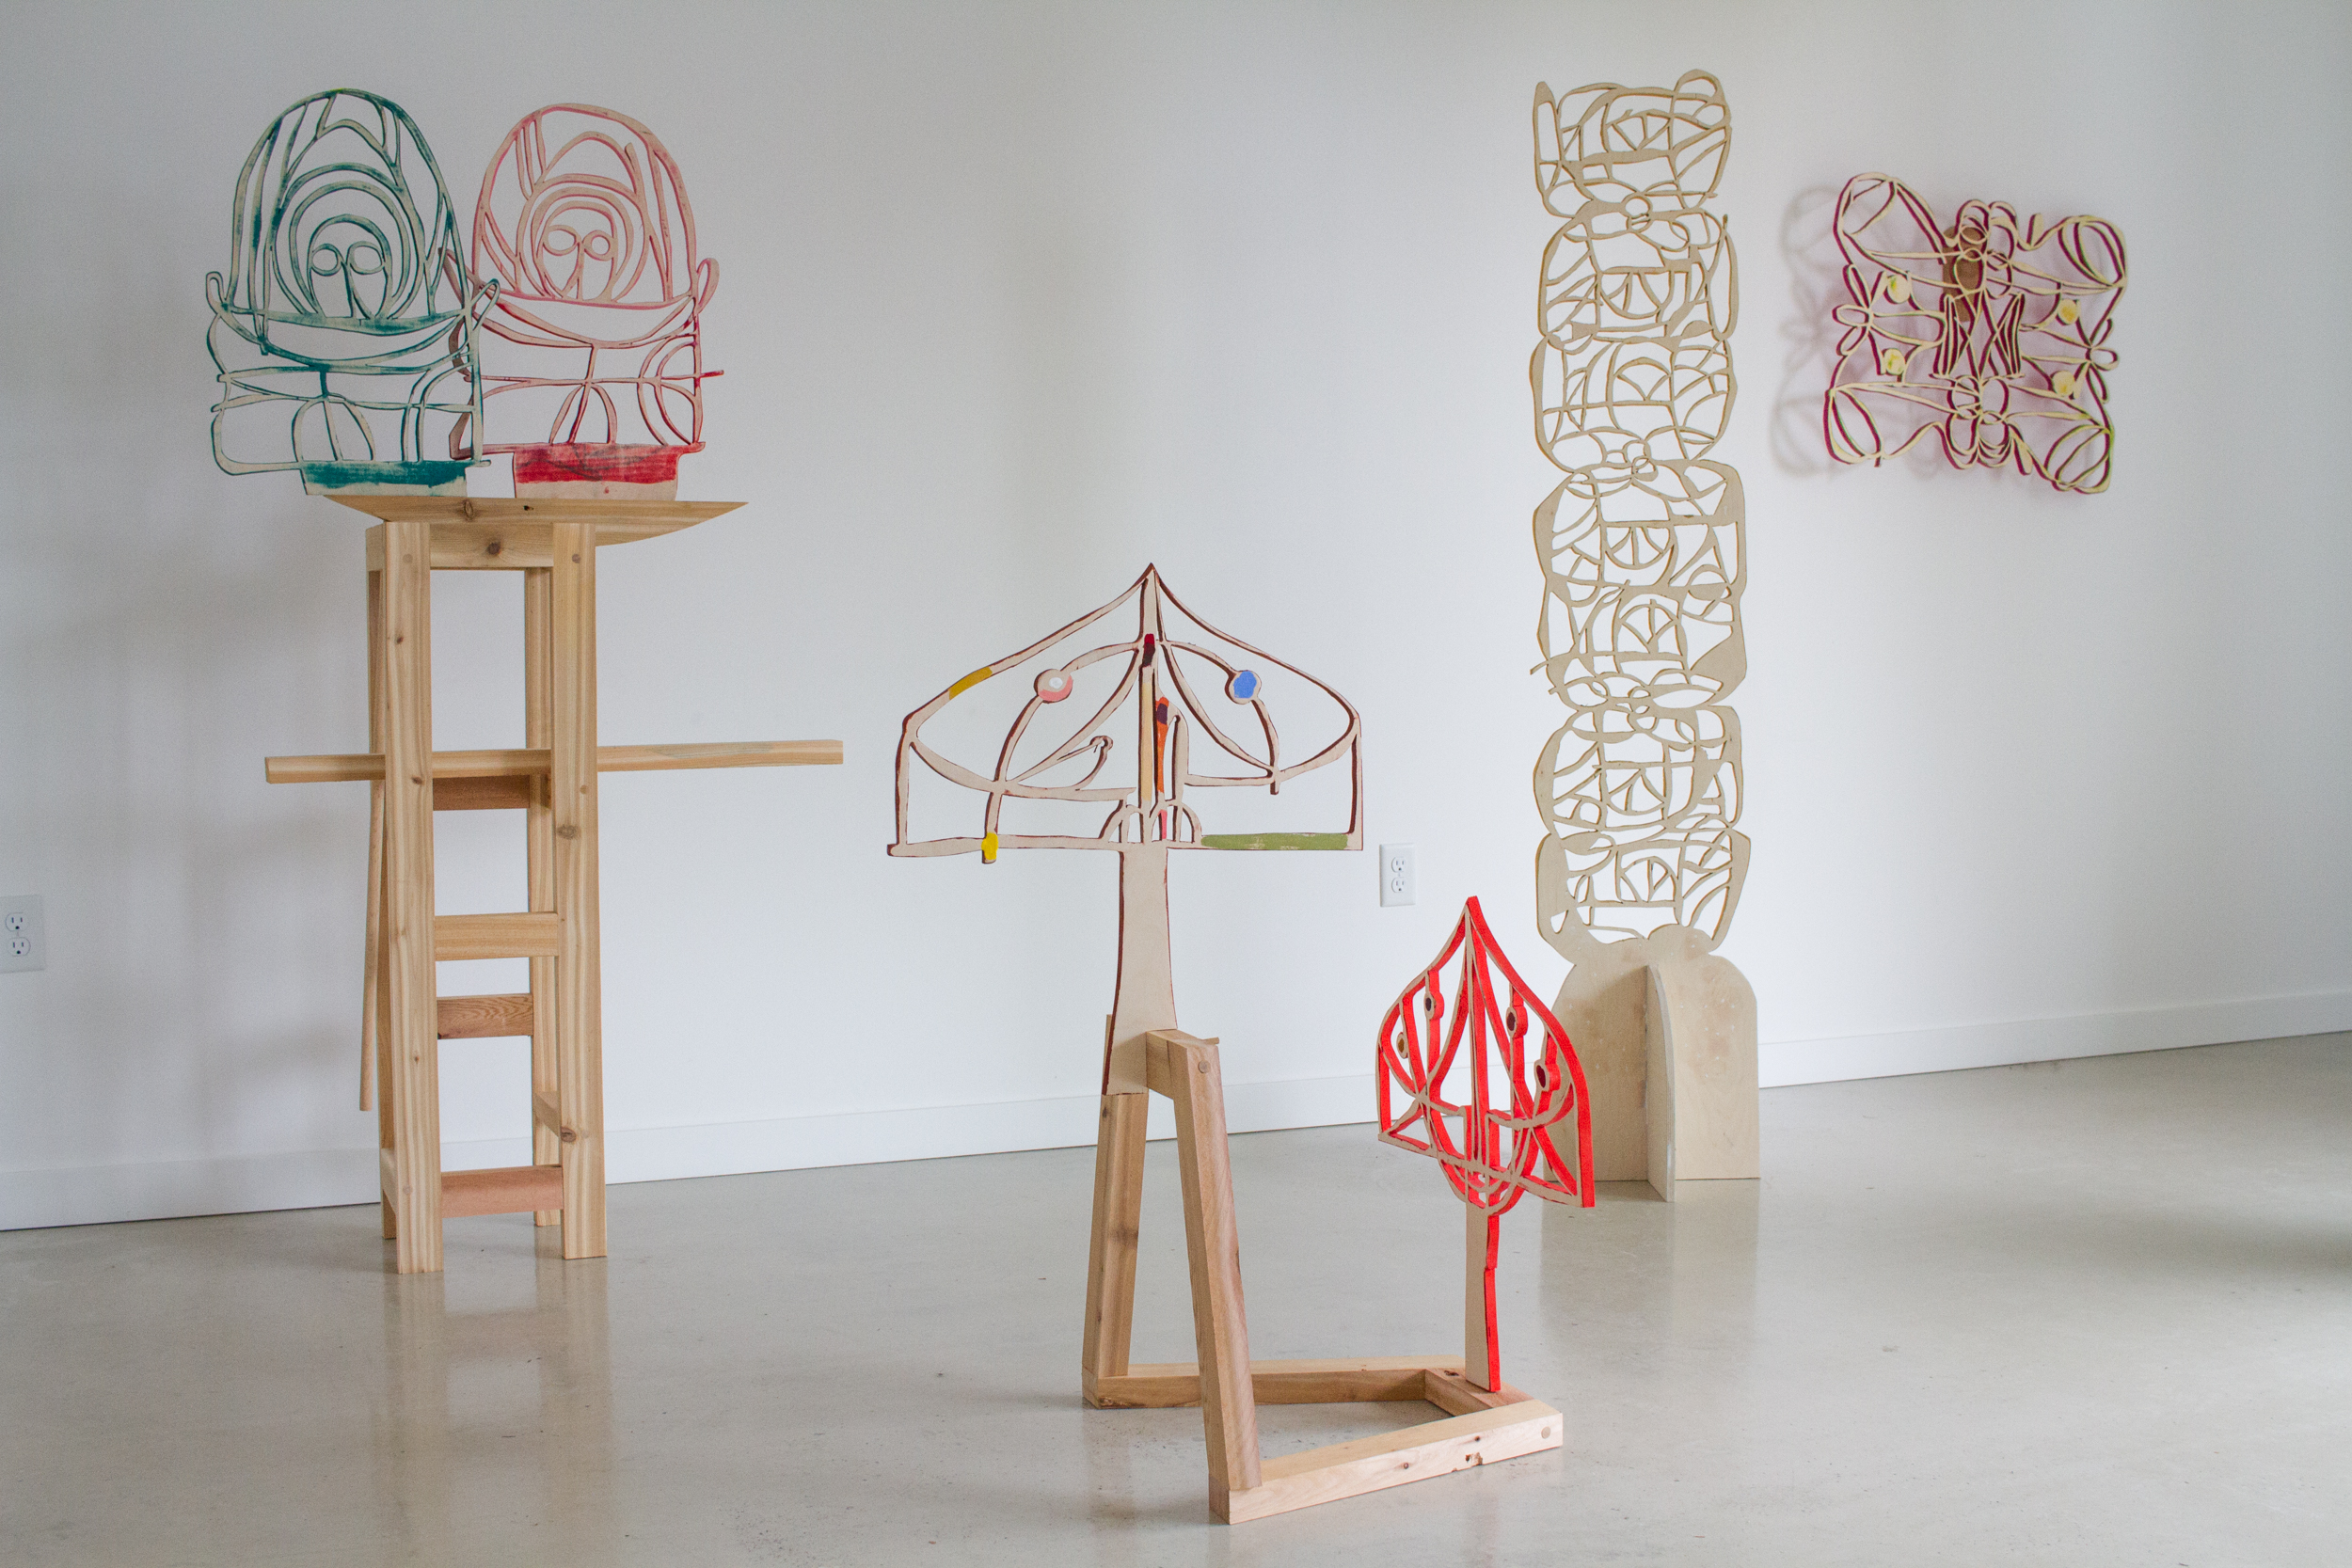  Installation view from group show “Beyond Control,” Peace Sign Gallery, Portland, OR, Jan, 2018.  L to R:  Tender Angels Of Death ,  Two Walled Gardens ,  Stalagmite ,  Moth #2   Birch plywood, cedar, flashe, birch, oak, brass, dimensions variable. 